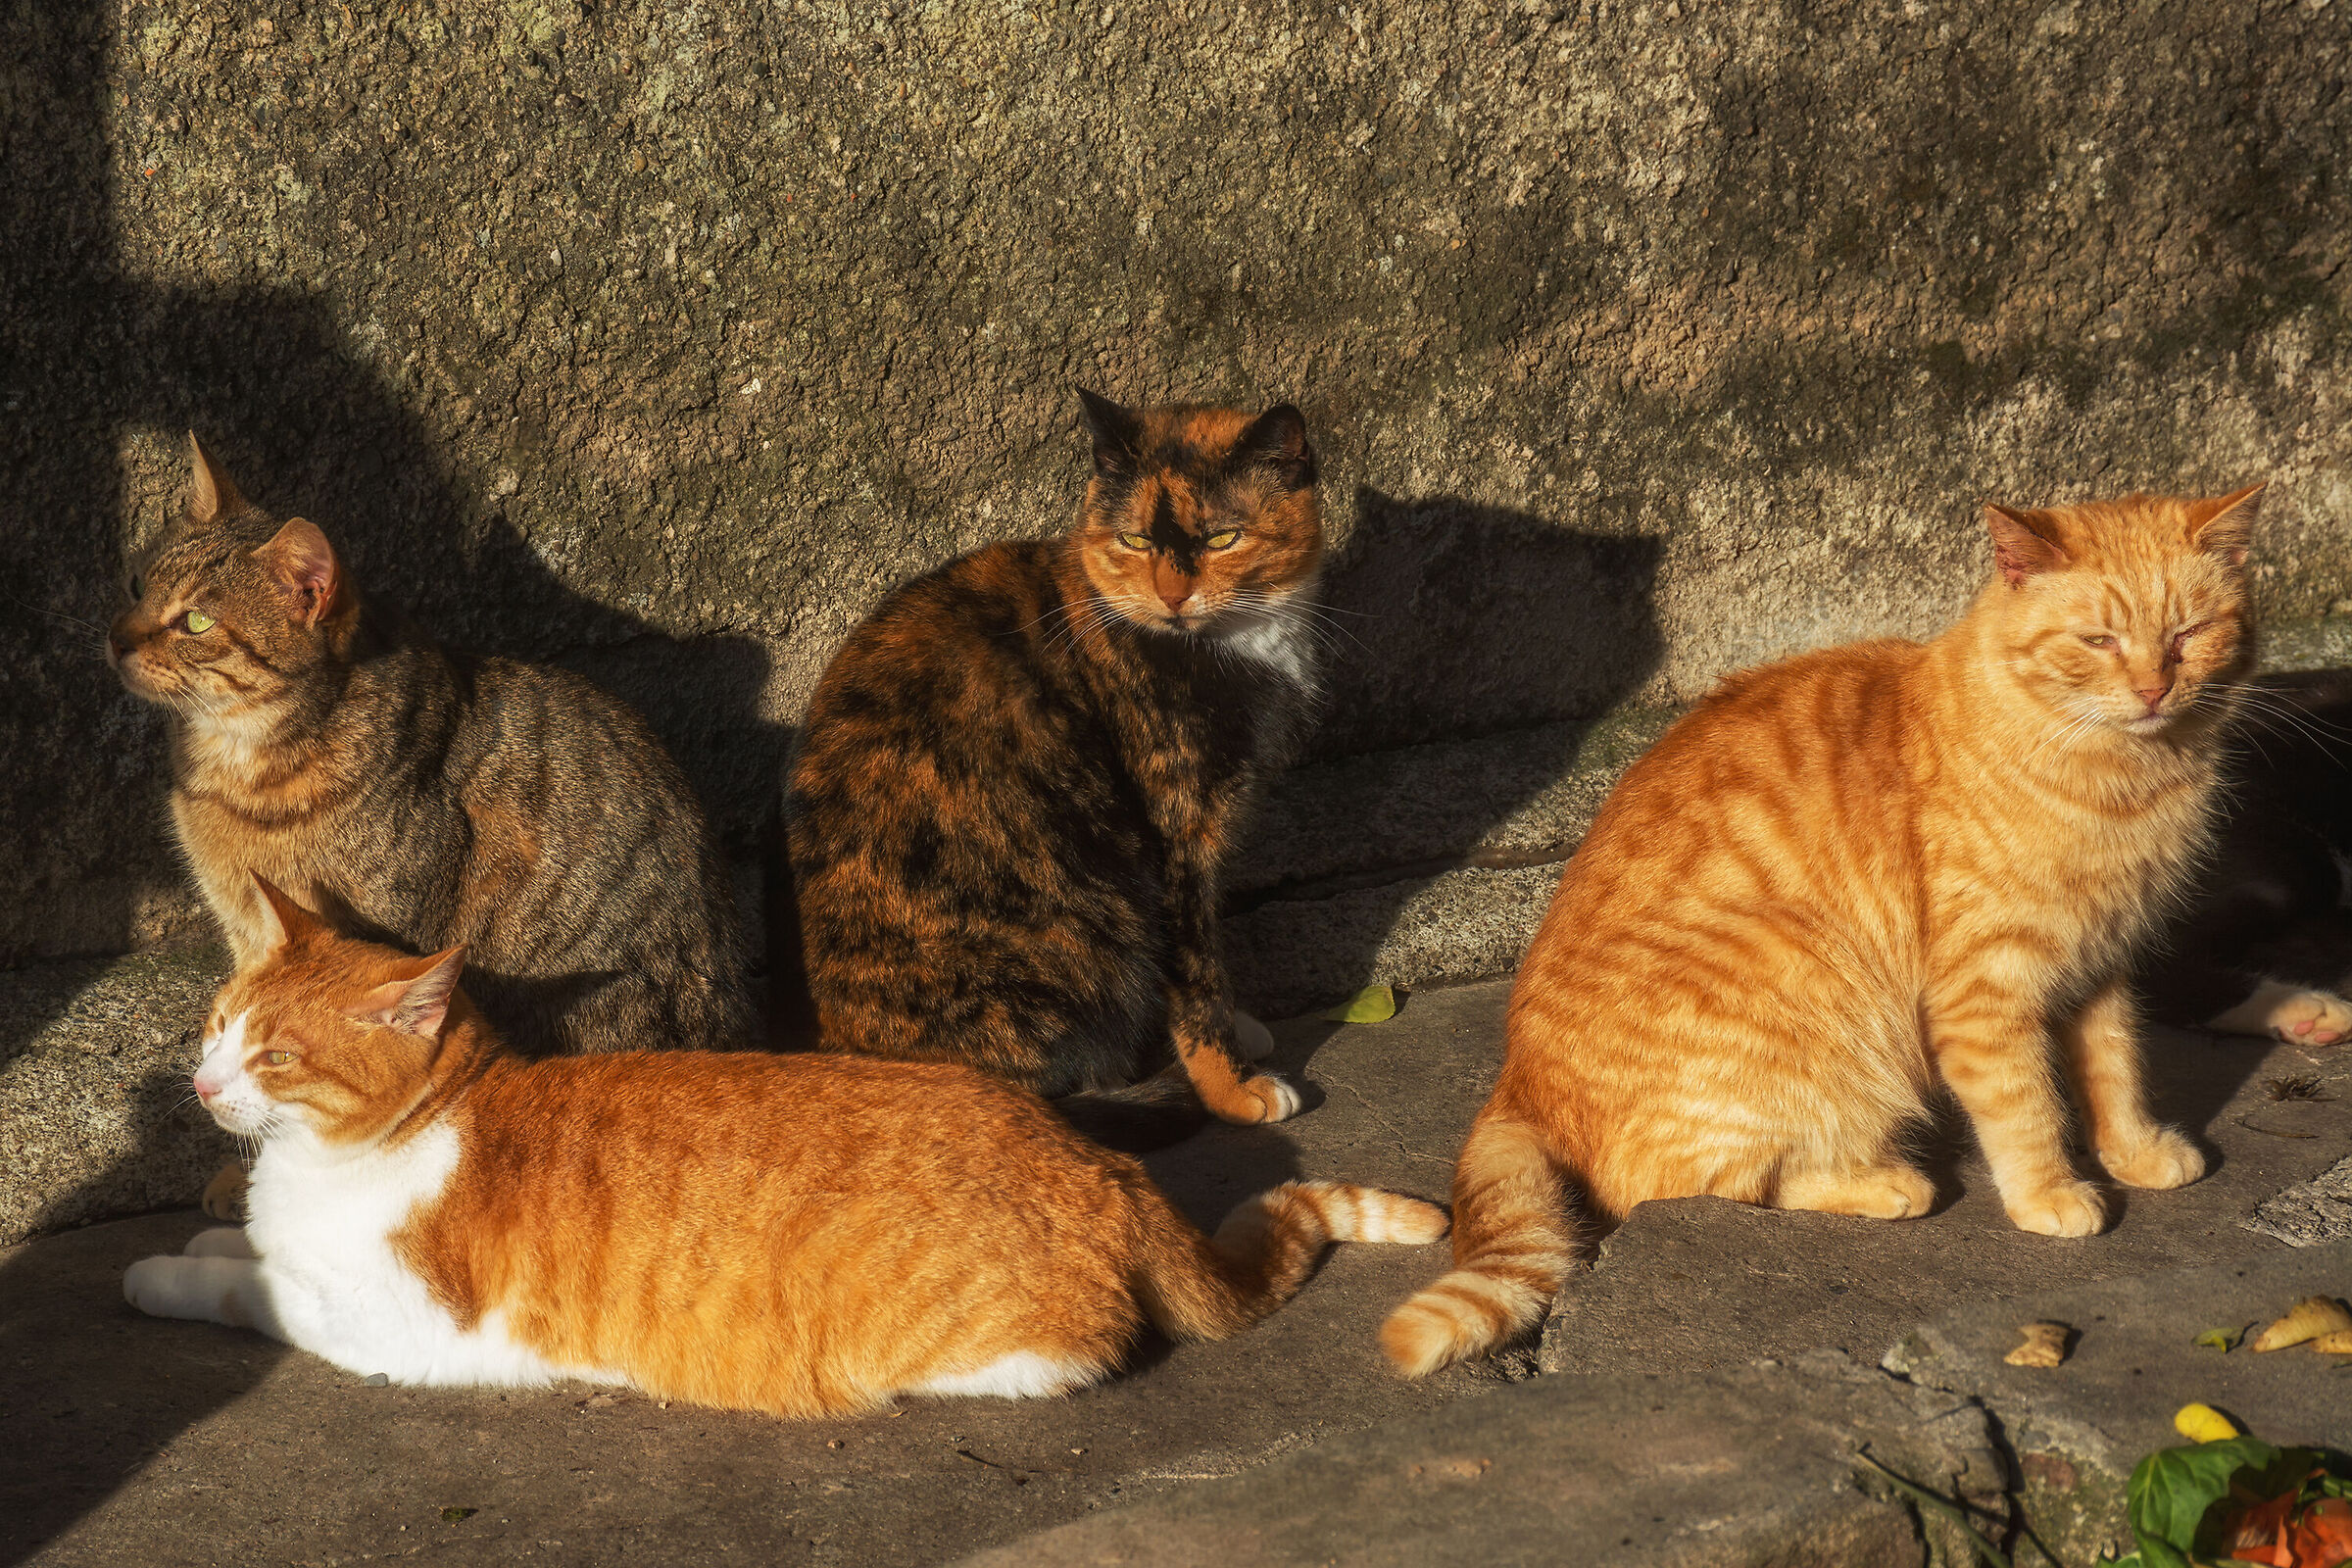 The gang of cats...